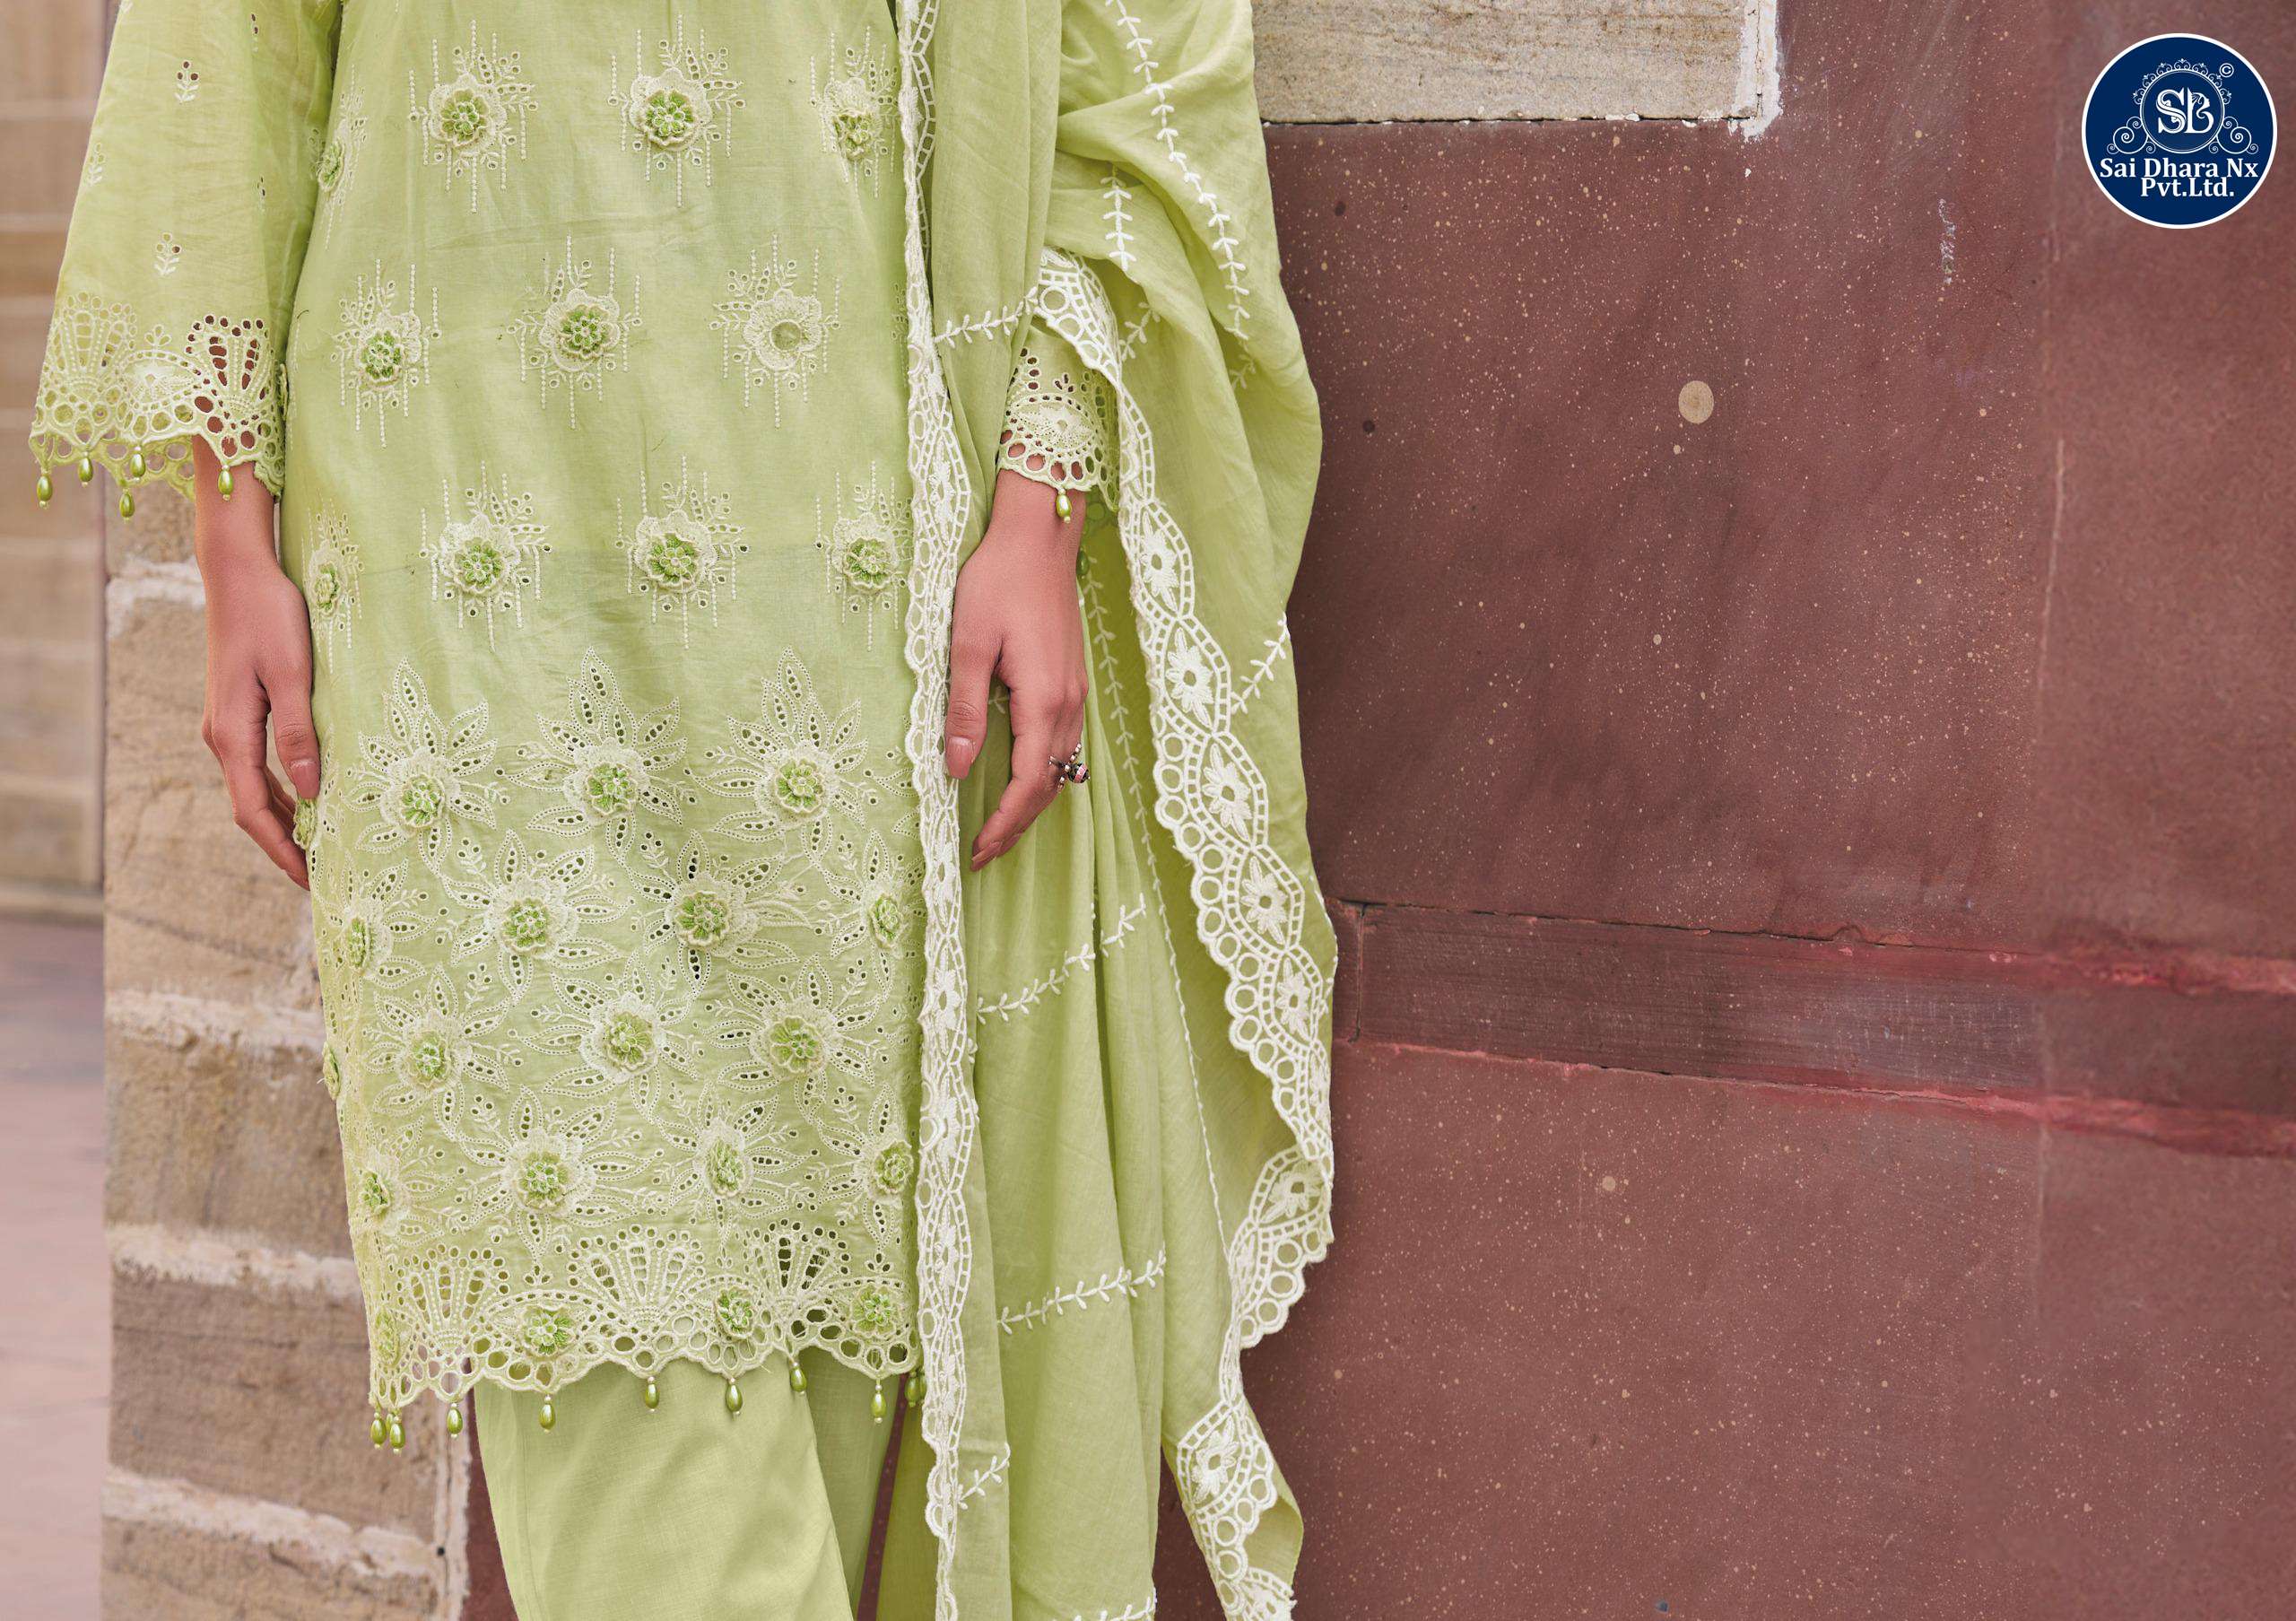 SHREE FABS PRESENTS CAMBRIC LAWN BORING SELF WORK READYMADE 3 PIECE SUIT WHOLESALE SHOP IN SURAT - SaiDharaNx